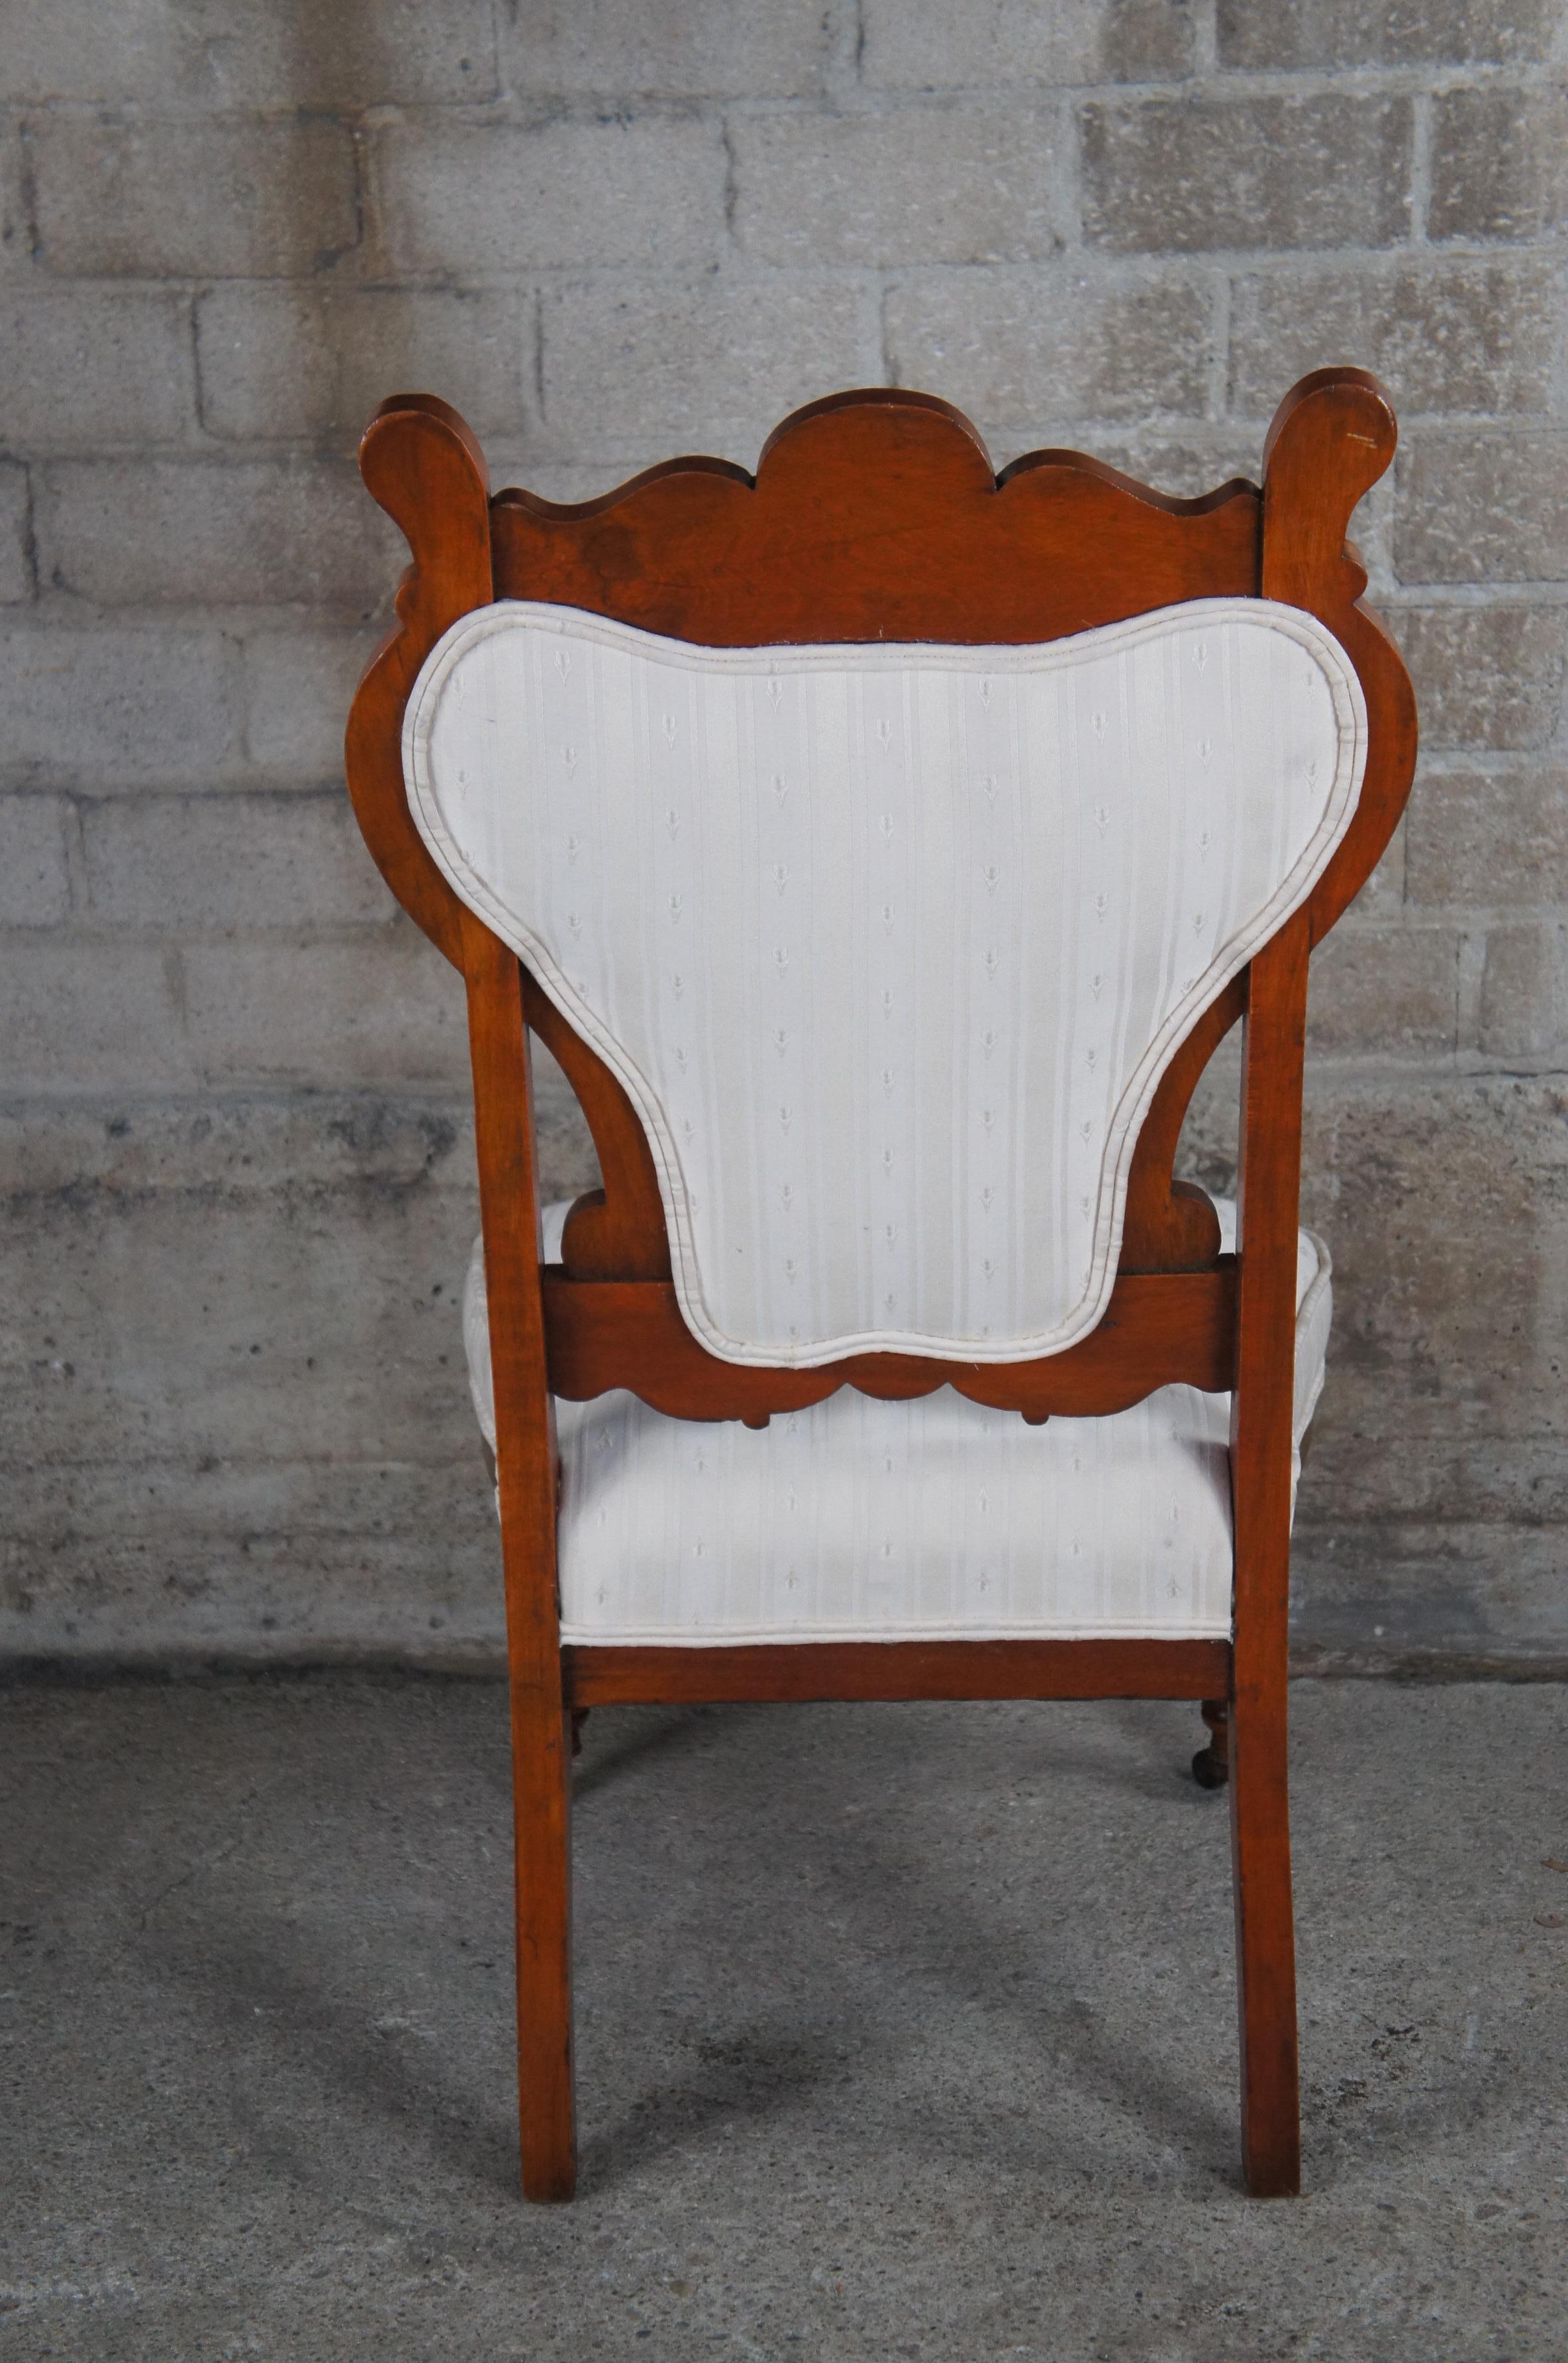 2 Antique Edwardian Carved Mahogany Parlor Balloon Back Dining Side Chairs Pair For Sale 4